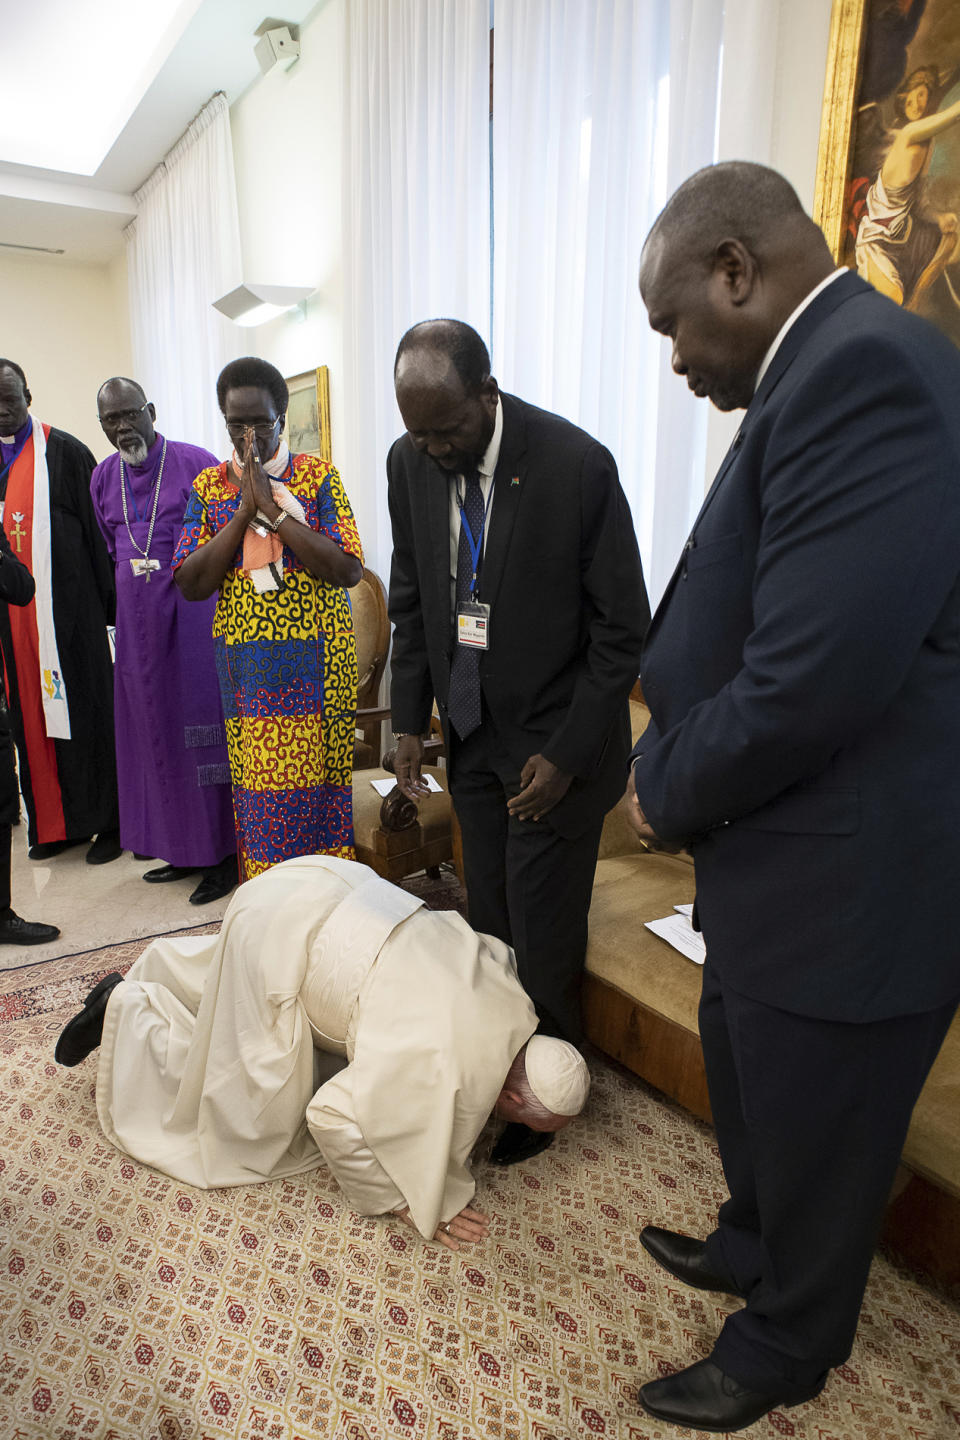 Pope Francis kneels to kiss the feet of South Sudan's President Salva Kiir Mayardit, at the Vatican, Thursday, April 11, 2019. Pope Francis has closed a two-day retreat with South Sudan authorities at the Vatican with an unprecedented act of respect, kneeling down and kissing the feet of the African leaders. (Vatican Media via AP)